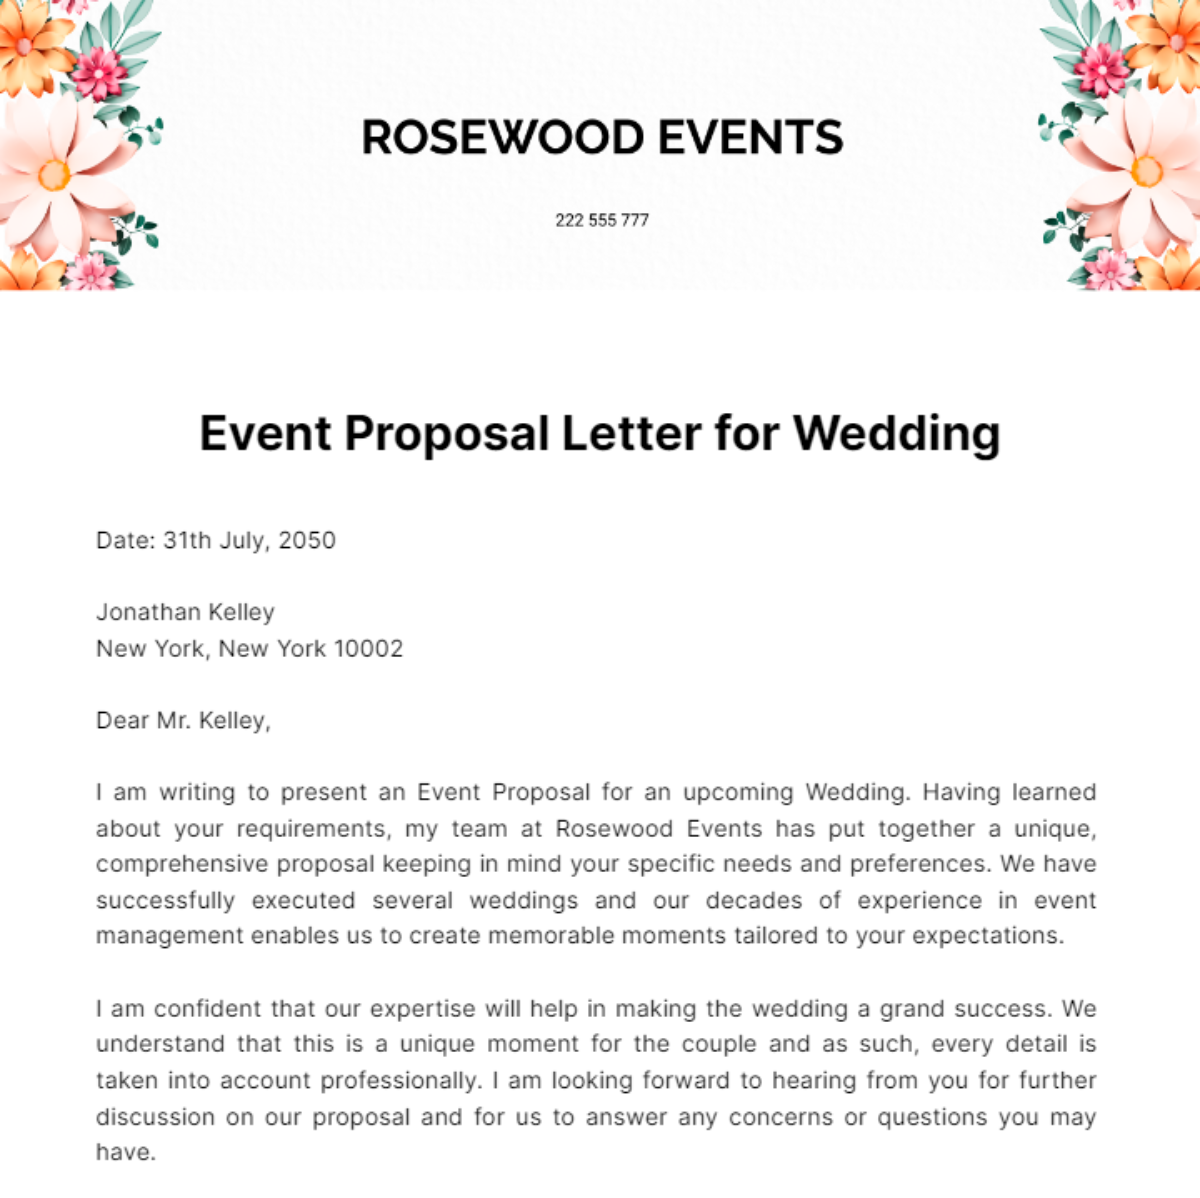 Event Proposal Letter for Wedding Template